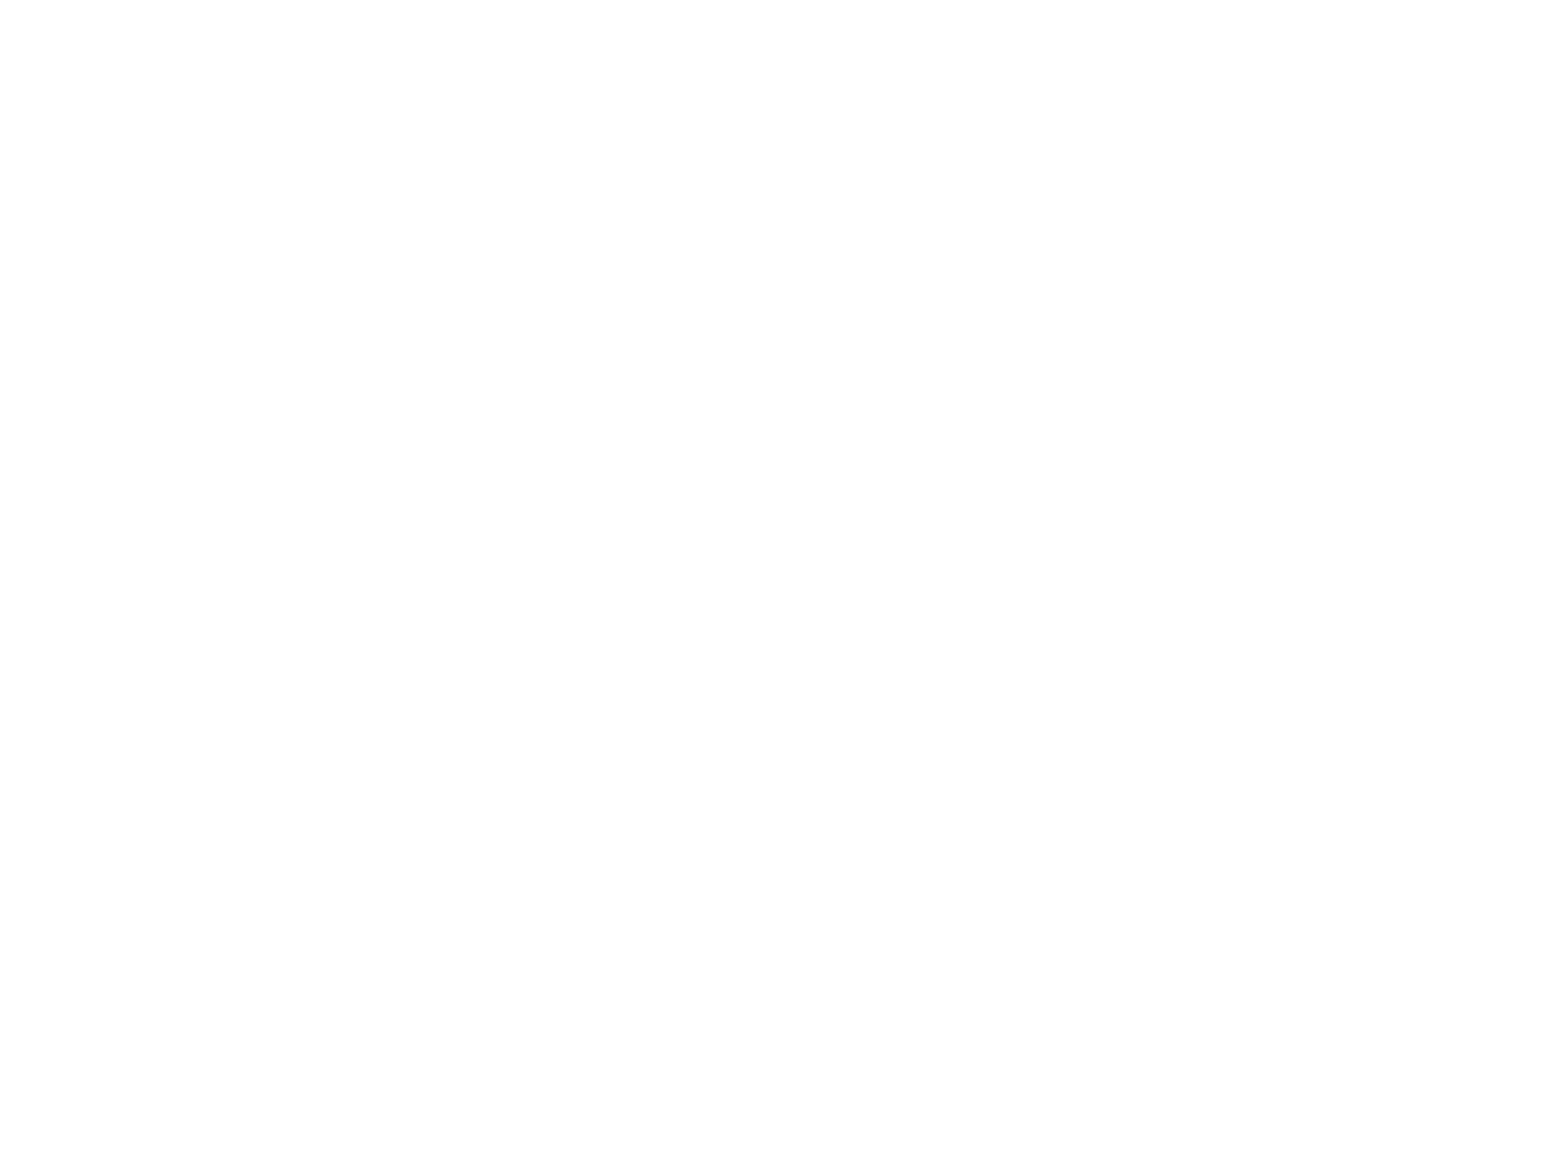 Columbia Banking System logo for dark backgrounds (transparent PNG)